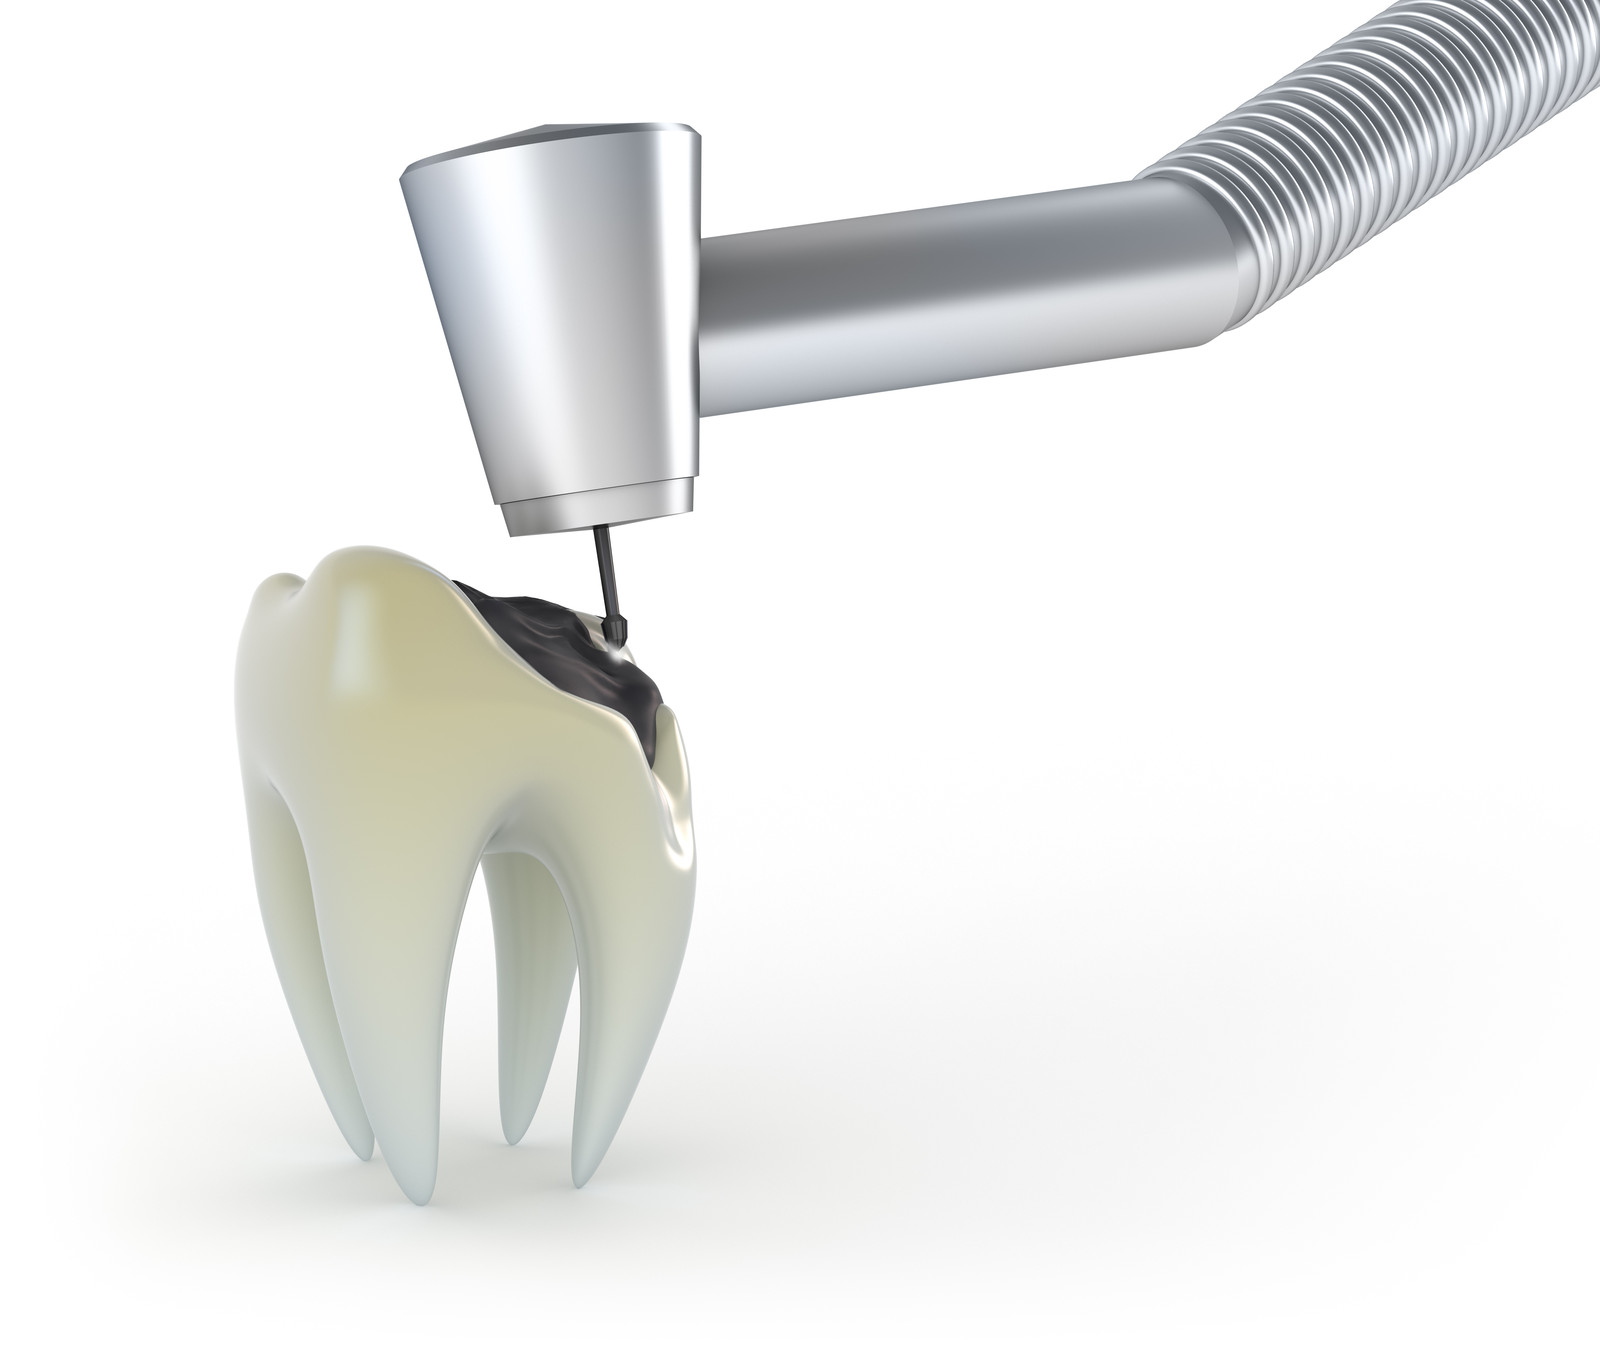 Is your dentist mercury-safe, or just mercury-free?